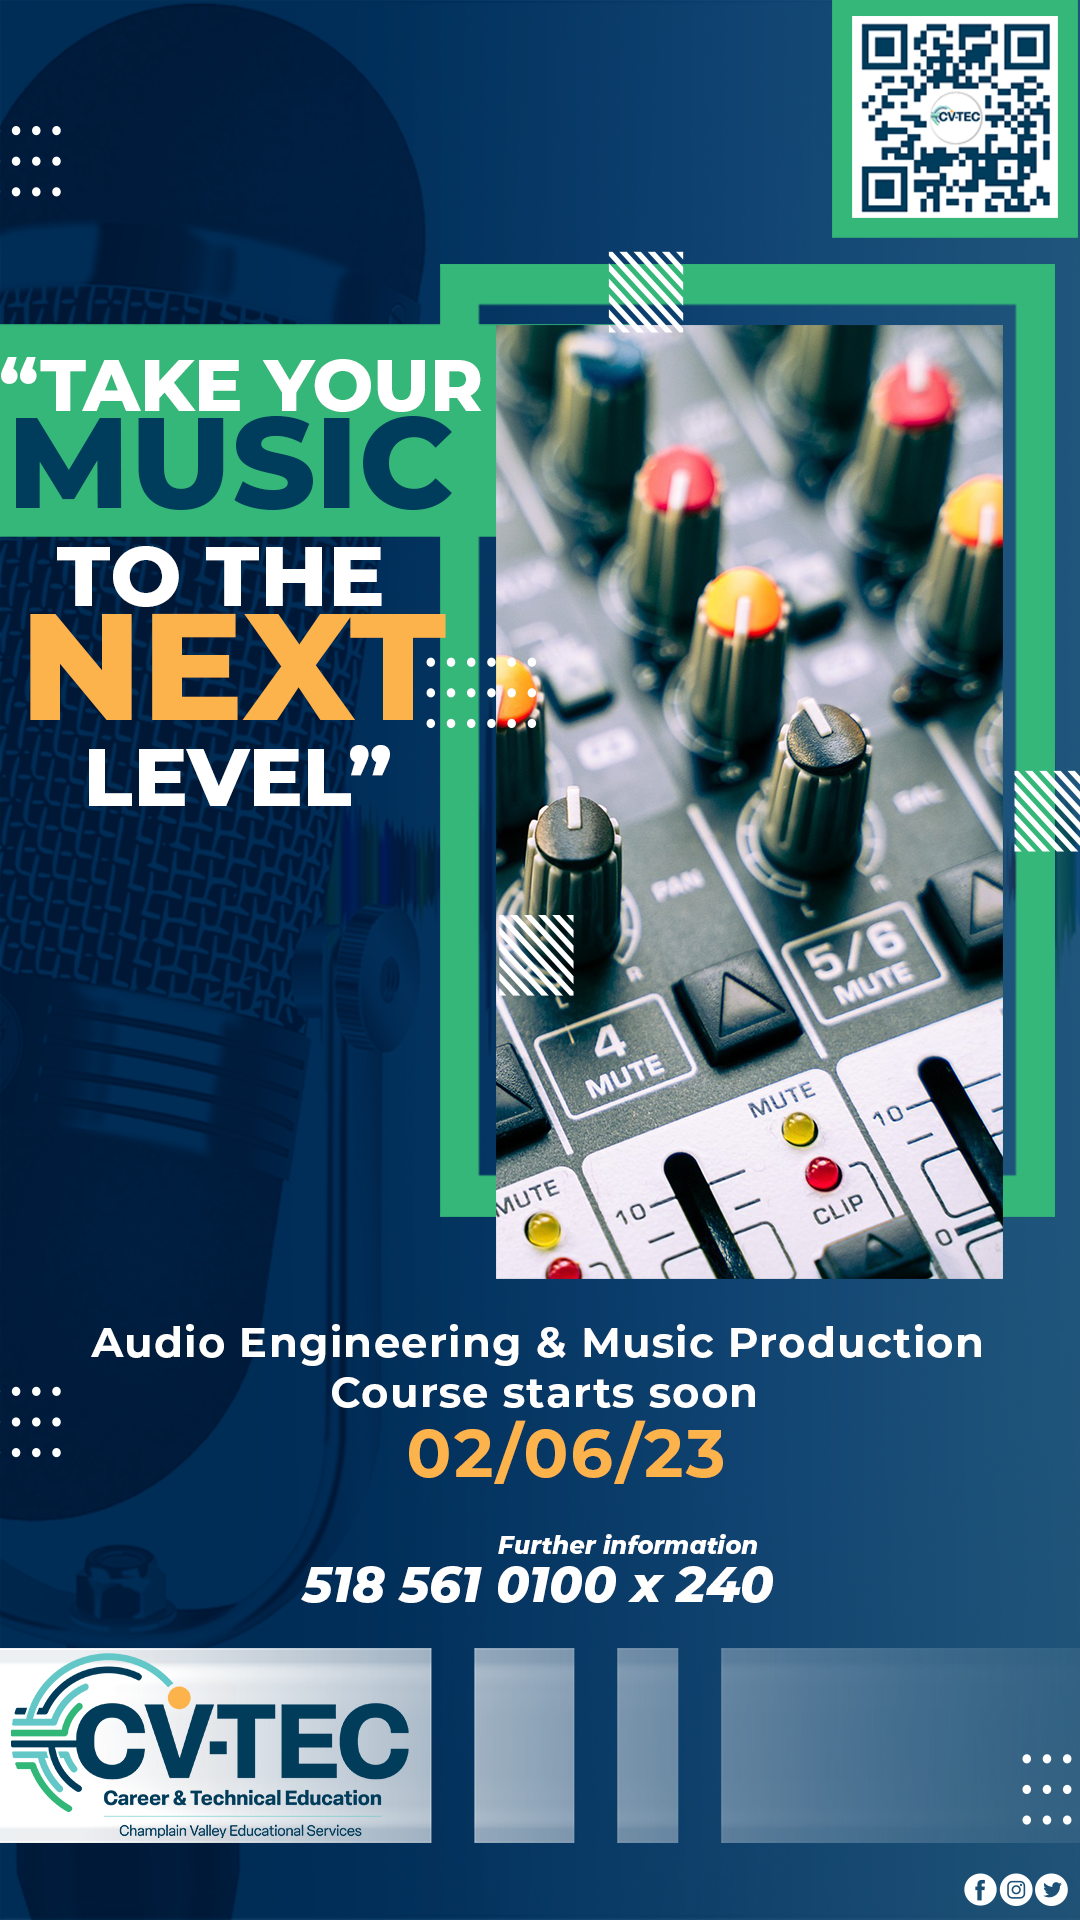 New Facebook Image for the new Audio Engineering and Music Production Course